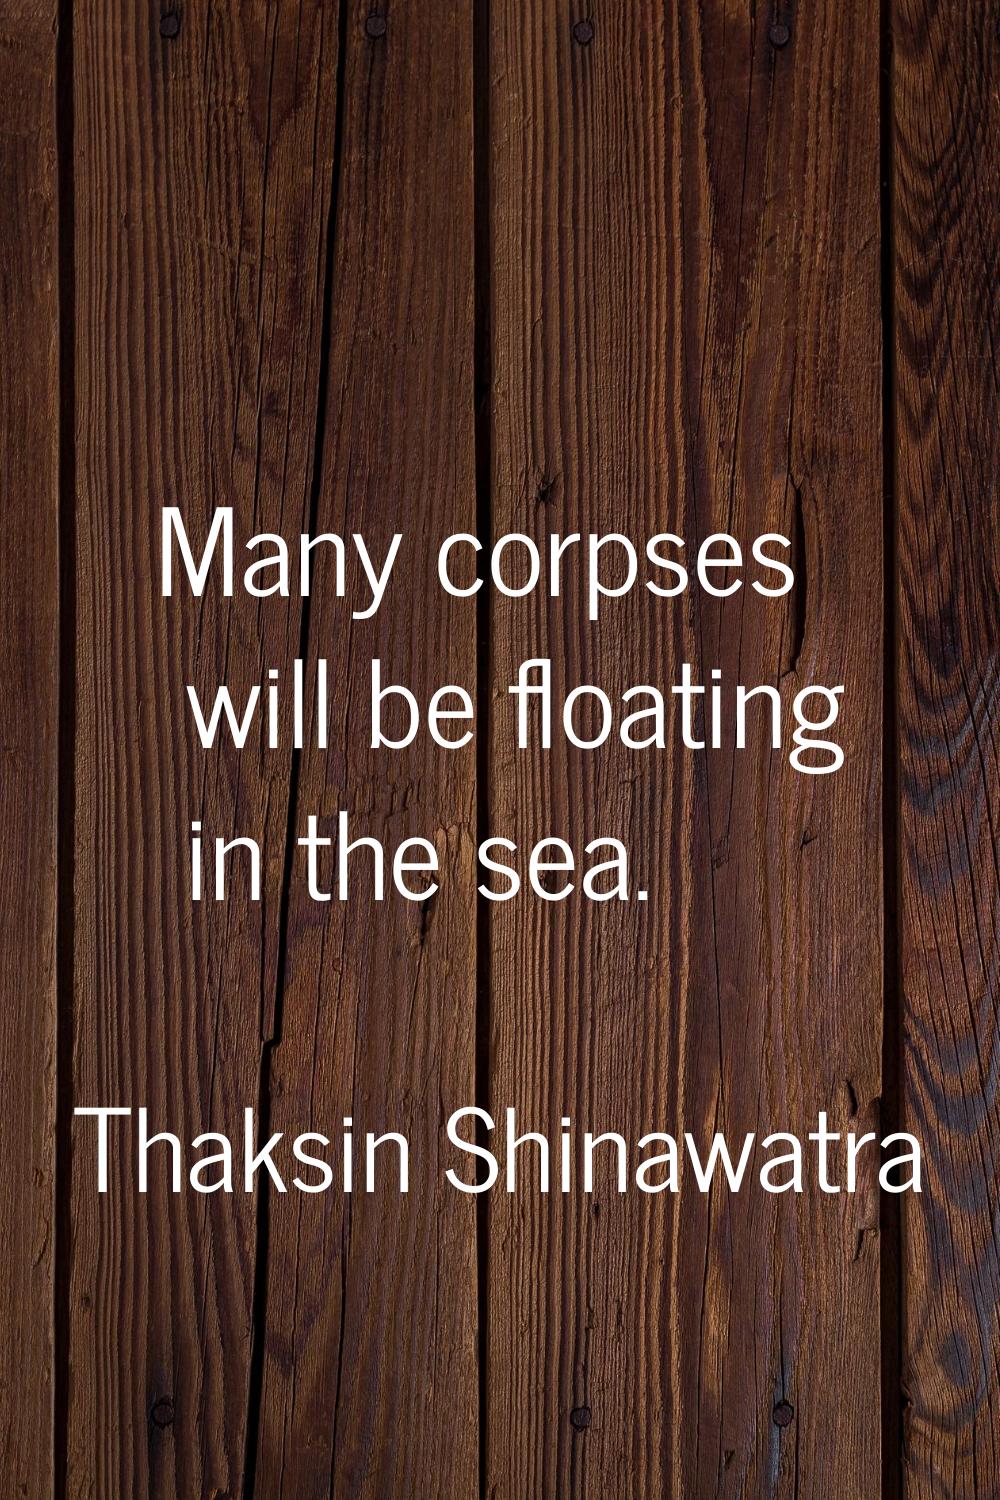 Many corpses will be floating in the sea.